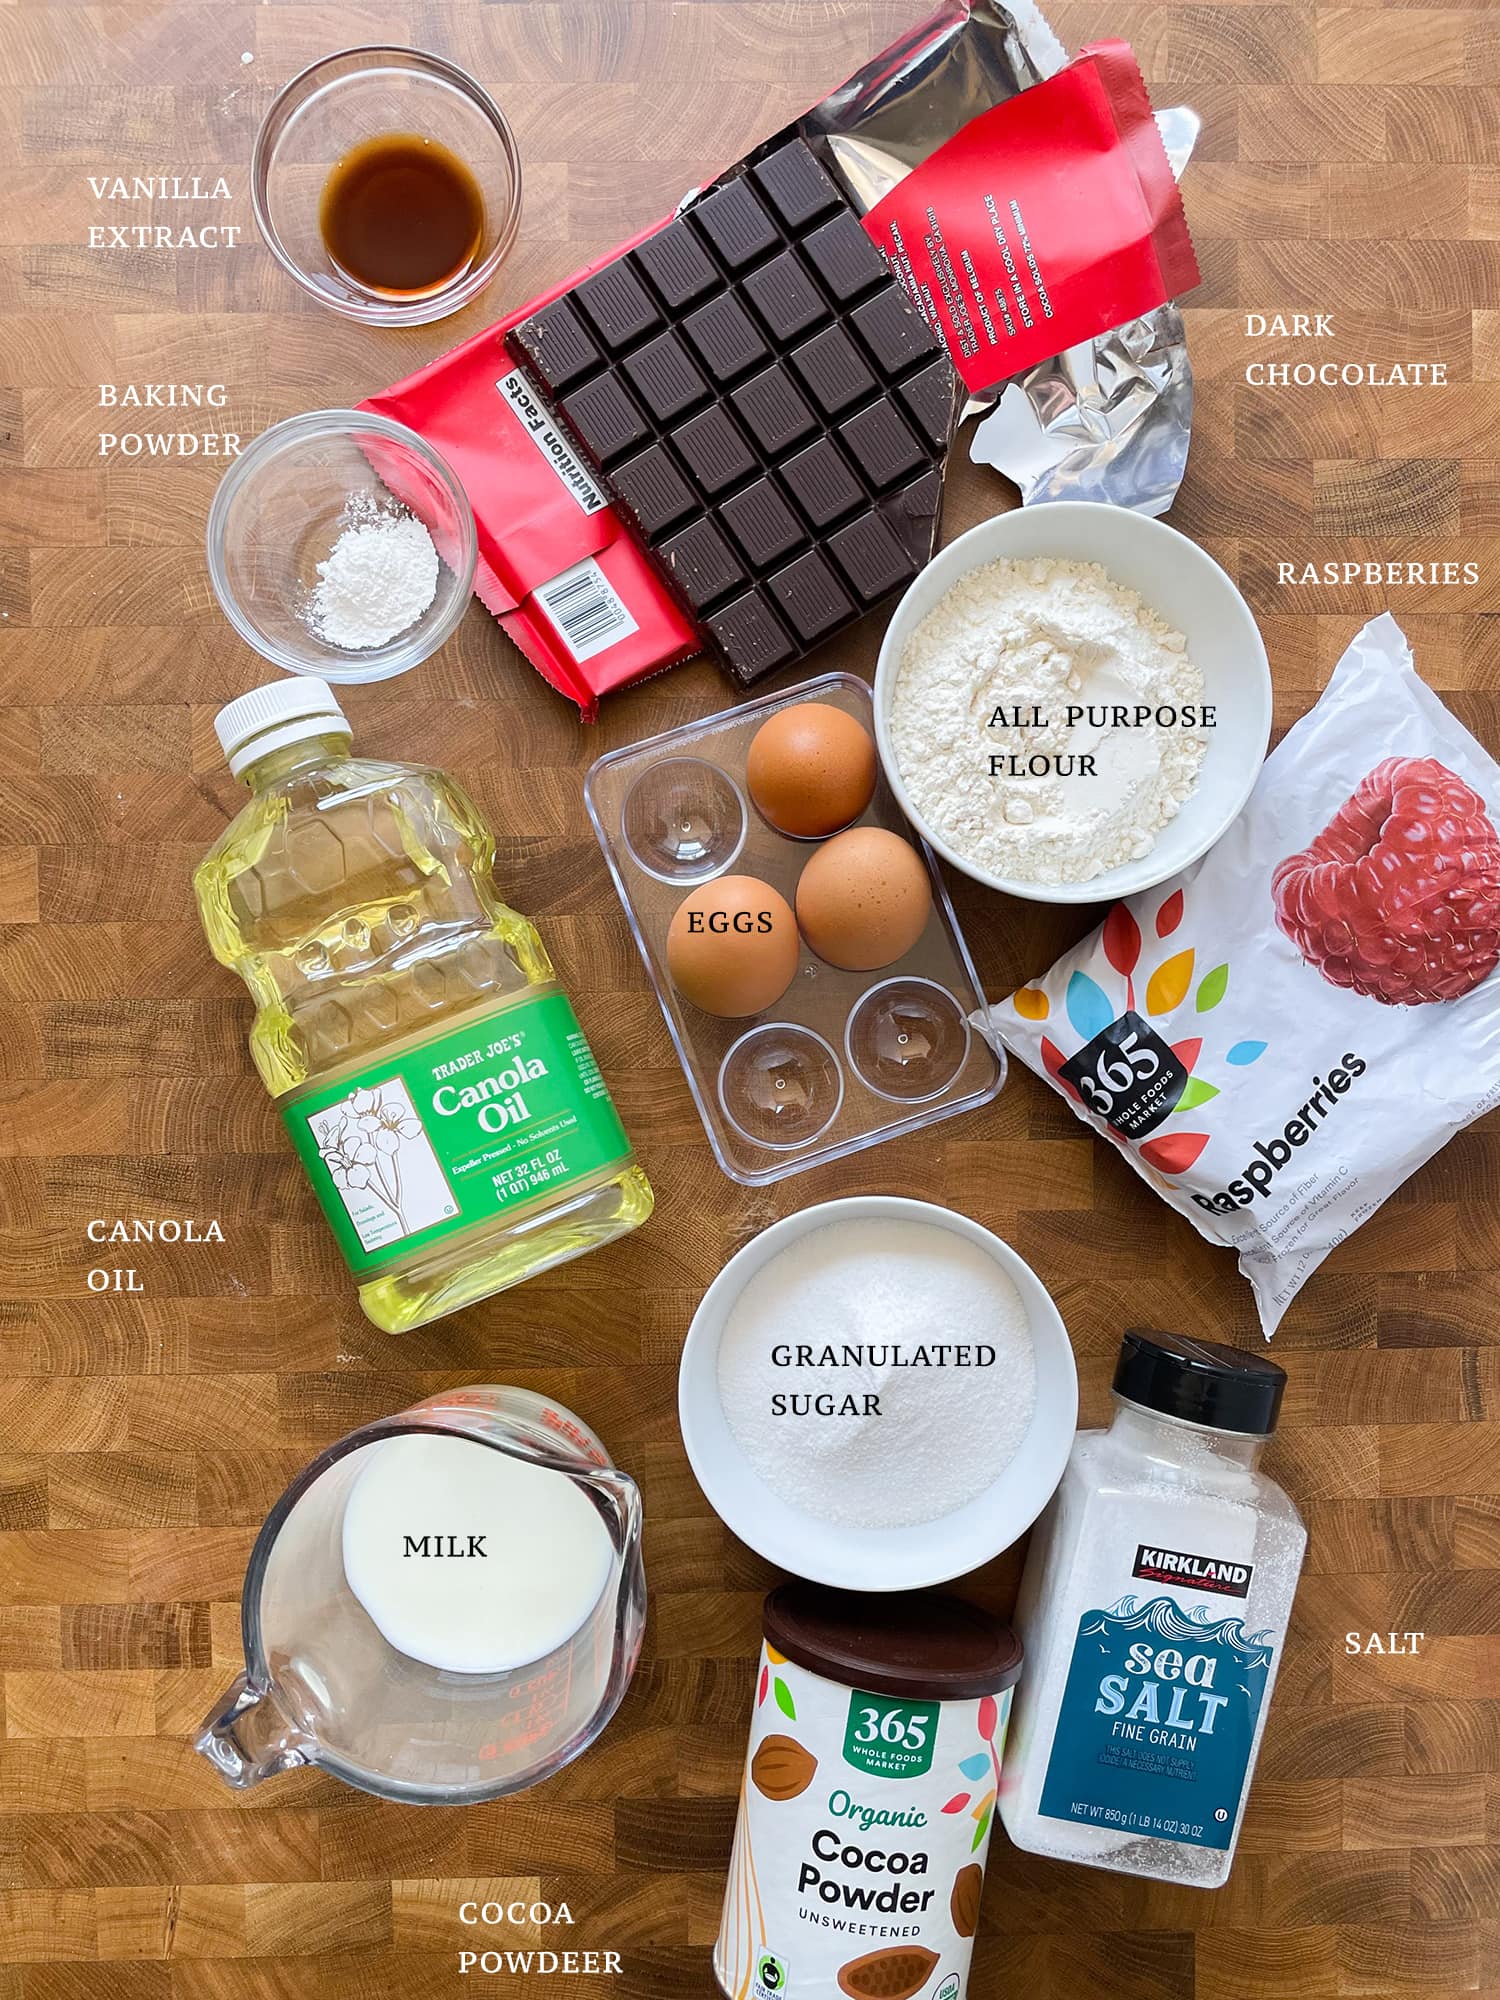 All ingredients needed to make a Chocolate Raspberry Cake laid out on a table and labeled. 